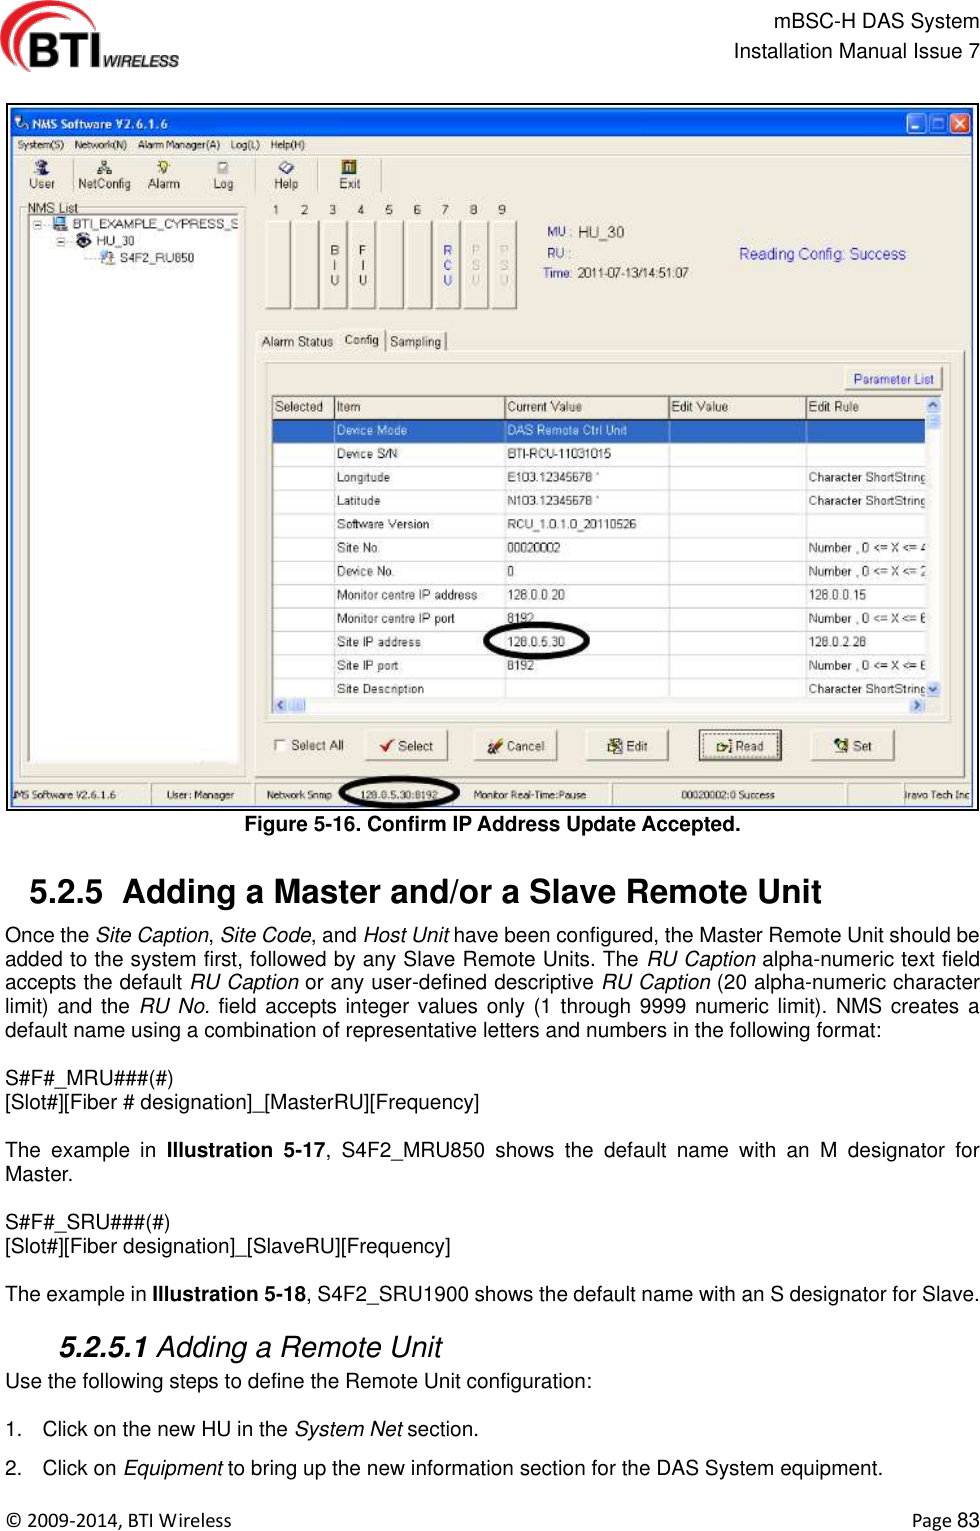                                                   mBSC-H DAS System   Installation Manual Issue 7  ©  2009-2014, BTI Wireless    Page 83  Figure 5-16. Confirm IP Address Update Accepted.   5.2.5  Adding a Master and/or a Slave Remote Unit Once the Site Caption, Site Code, and Host Unit have been configured, the Master Remote Unit should be added to the system first, followed by any Slave Remote Units. The RU Caption alpha-numeric text field accepts the default RU Caption or any user-defined descriptive RU Caption (20 alpha-numeric character limit) and the  RU No. field accepts integer values only (1 through 9999 numeric limit). NMS creates a default name using a combination of representative letters and numbers in the following format:  S#F#_MRU###(#) [Slot#][Fiber # designation]_[MasterRU][Frequency]  The  example  in  Illustration  5-17,  S4F2_MRU850  shows  the  default  name  with  an  M  designator  for Master.  S#F#_SRU###(#) [Slot#][Fiber designation]_[SlaveRU][Frequency]  The example in Illustration 5-18, S4F2_SRU1900 shows the default name with an S designator for Slave.   5.2.5.1 Adding a Remote Unit Use the following steps to define the Remote Unit configuration:  1.  Click on the new HU in the System Net section. 2.  Click on Equipment to bring up the new information section for the DAS System equipment. 